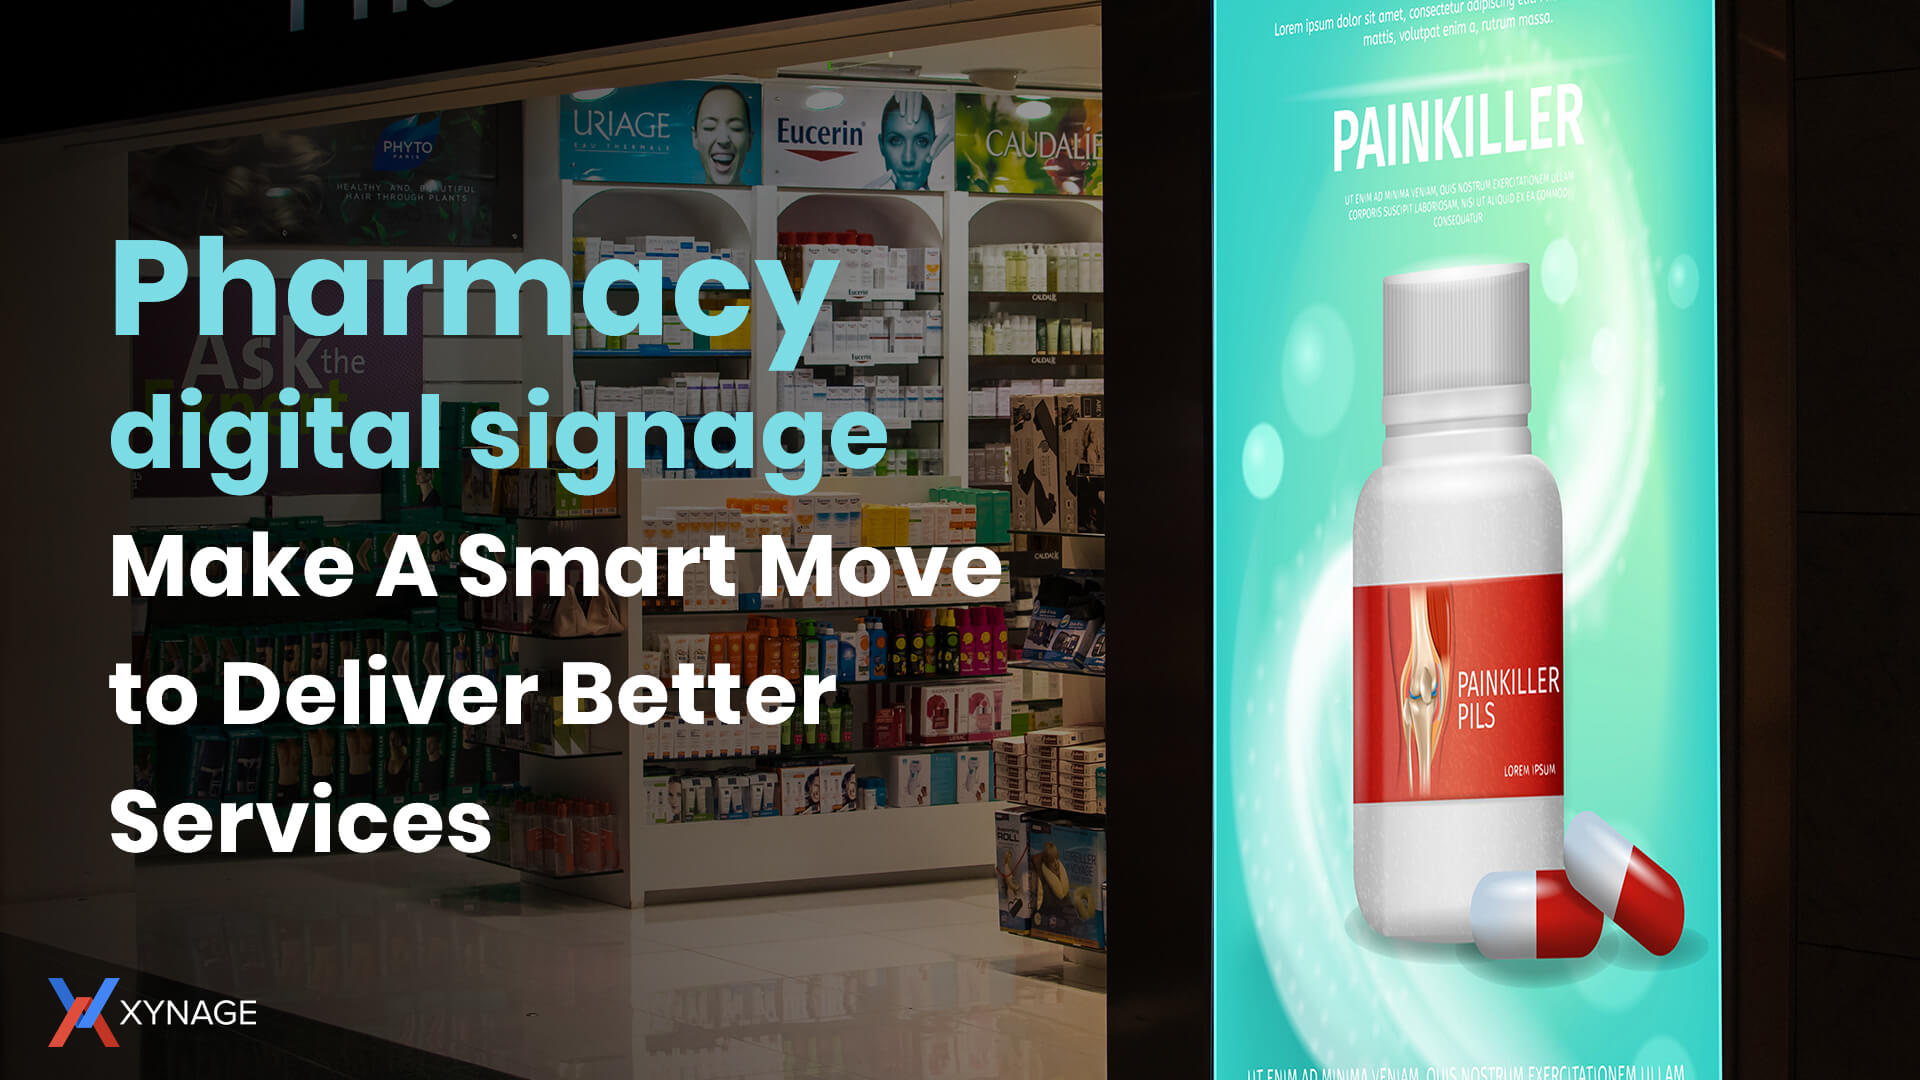 Pharmacy Digital Signage – Make A Smart Move to Deliver Better Services